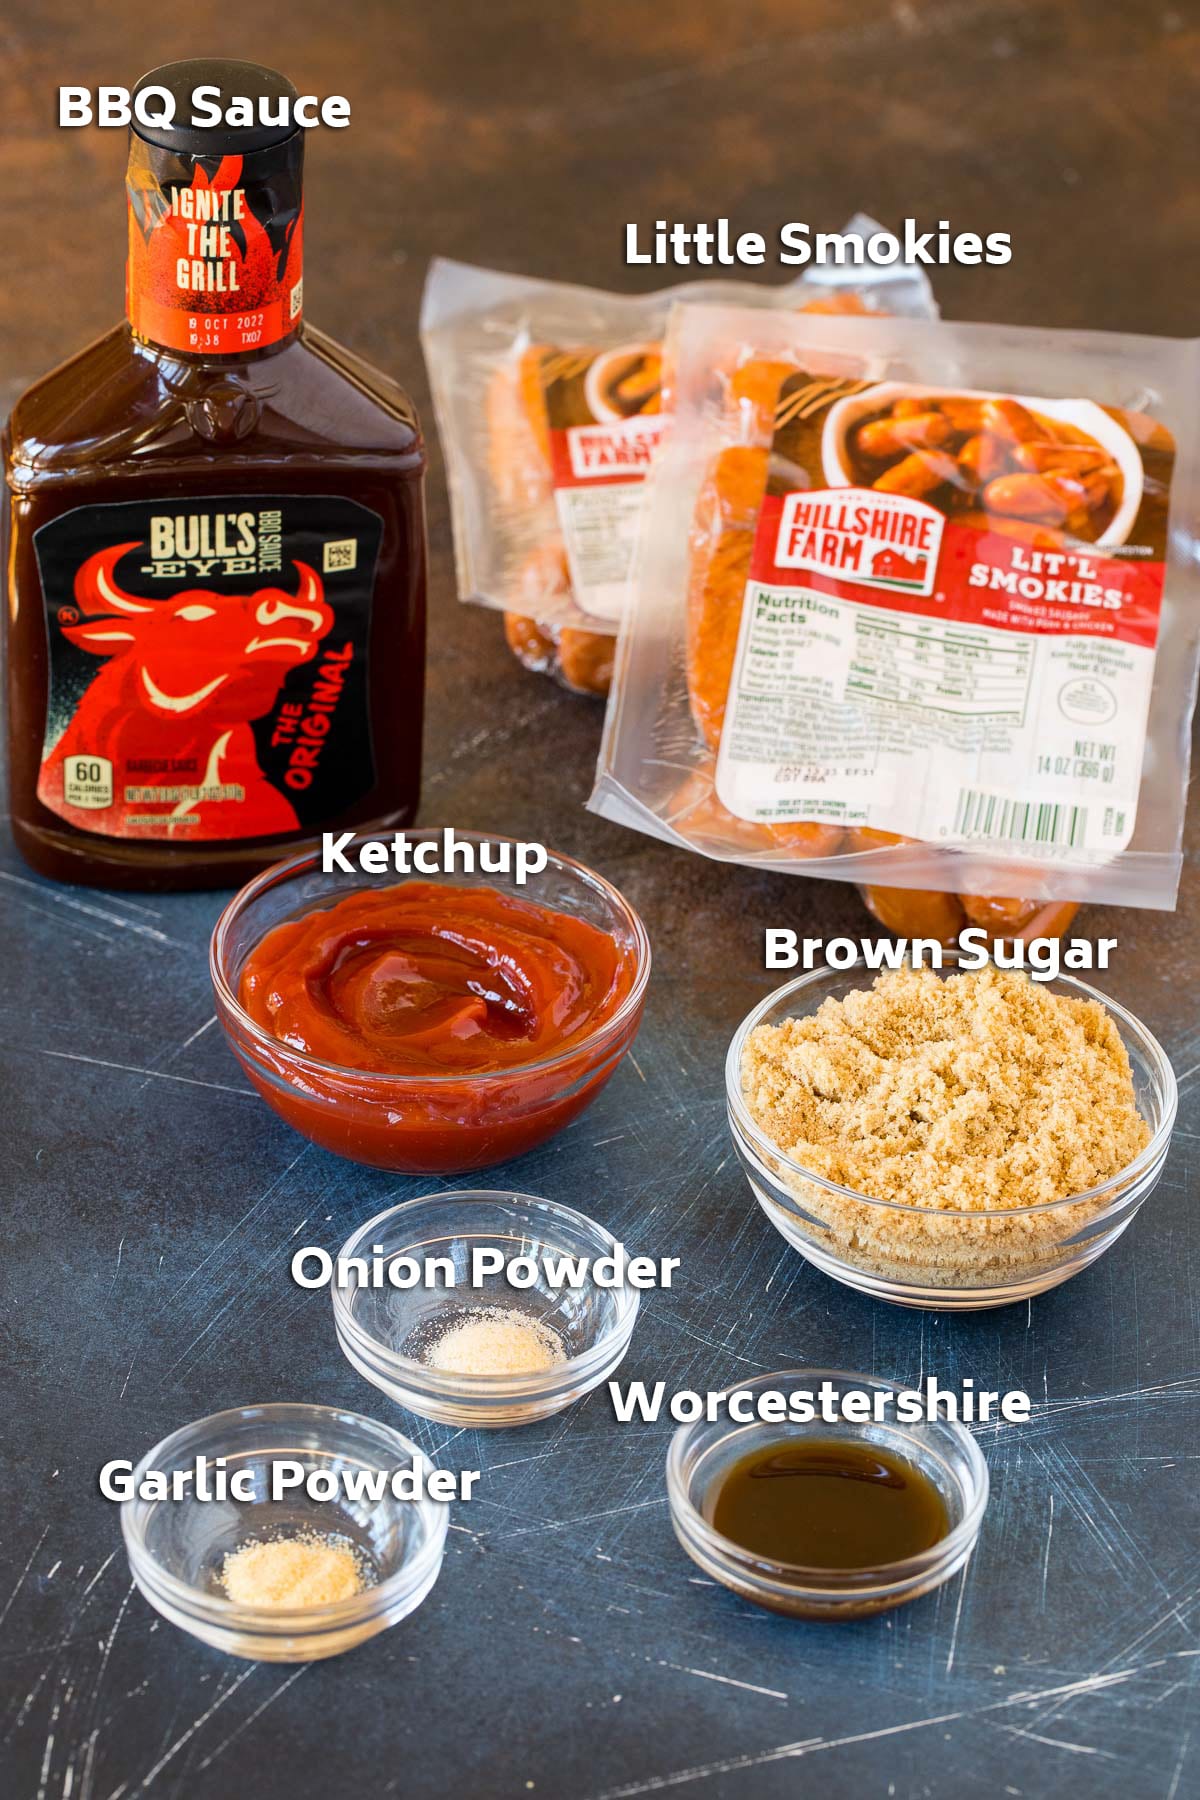 Ingredients including sausages, barbecue sauce, ketchup and seasonings.